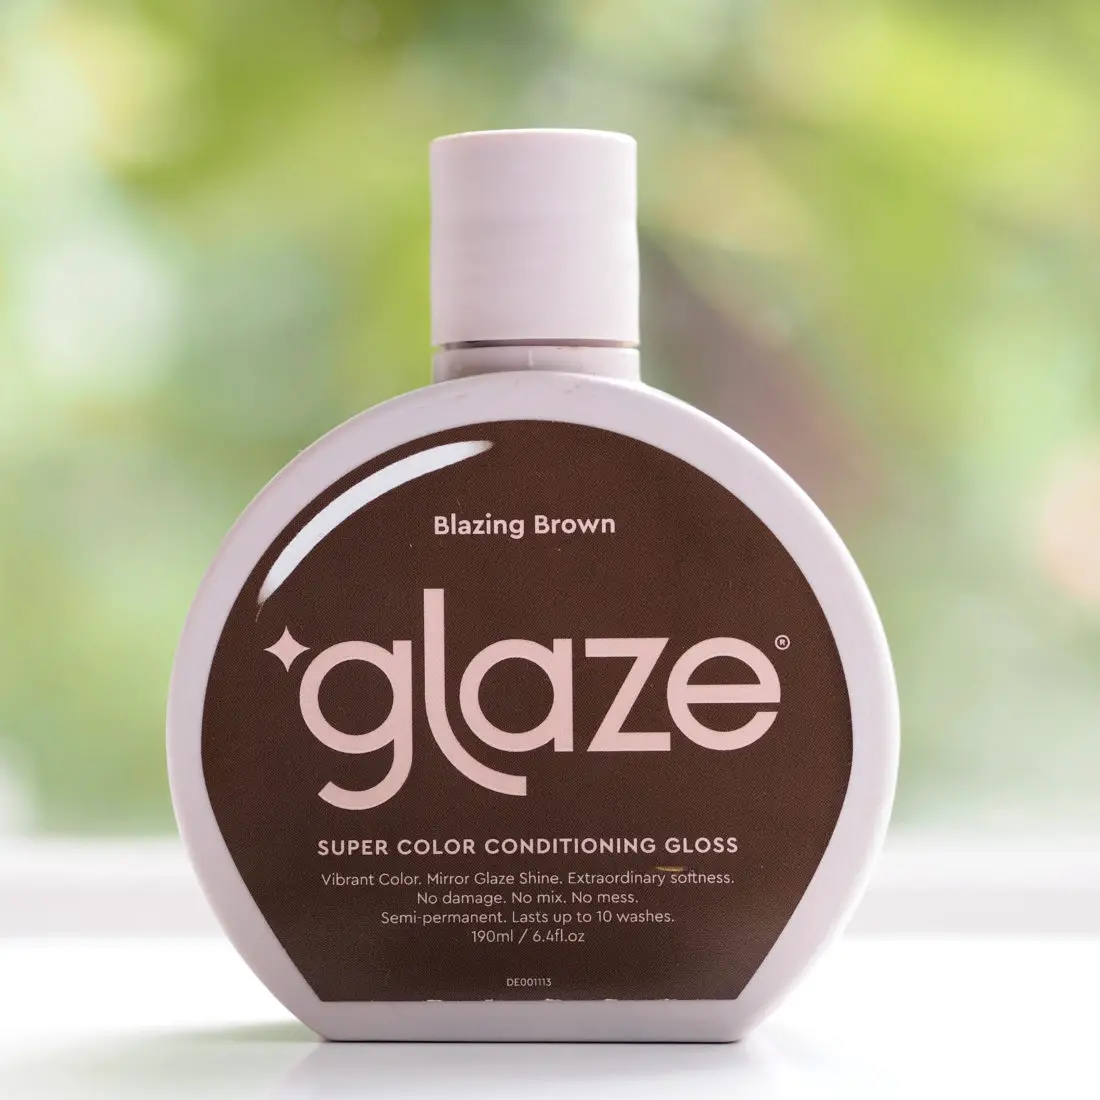 Glaze Super Colour Conditioning Gloss Review | British Beauty Blogger